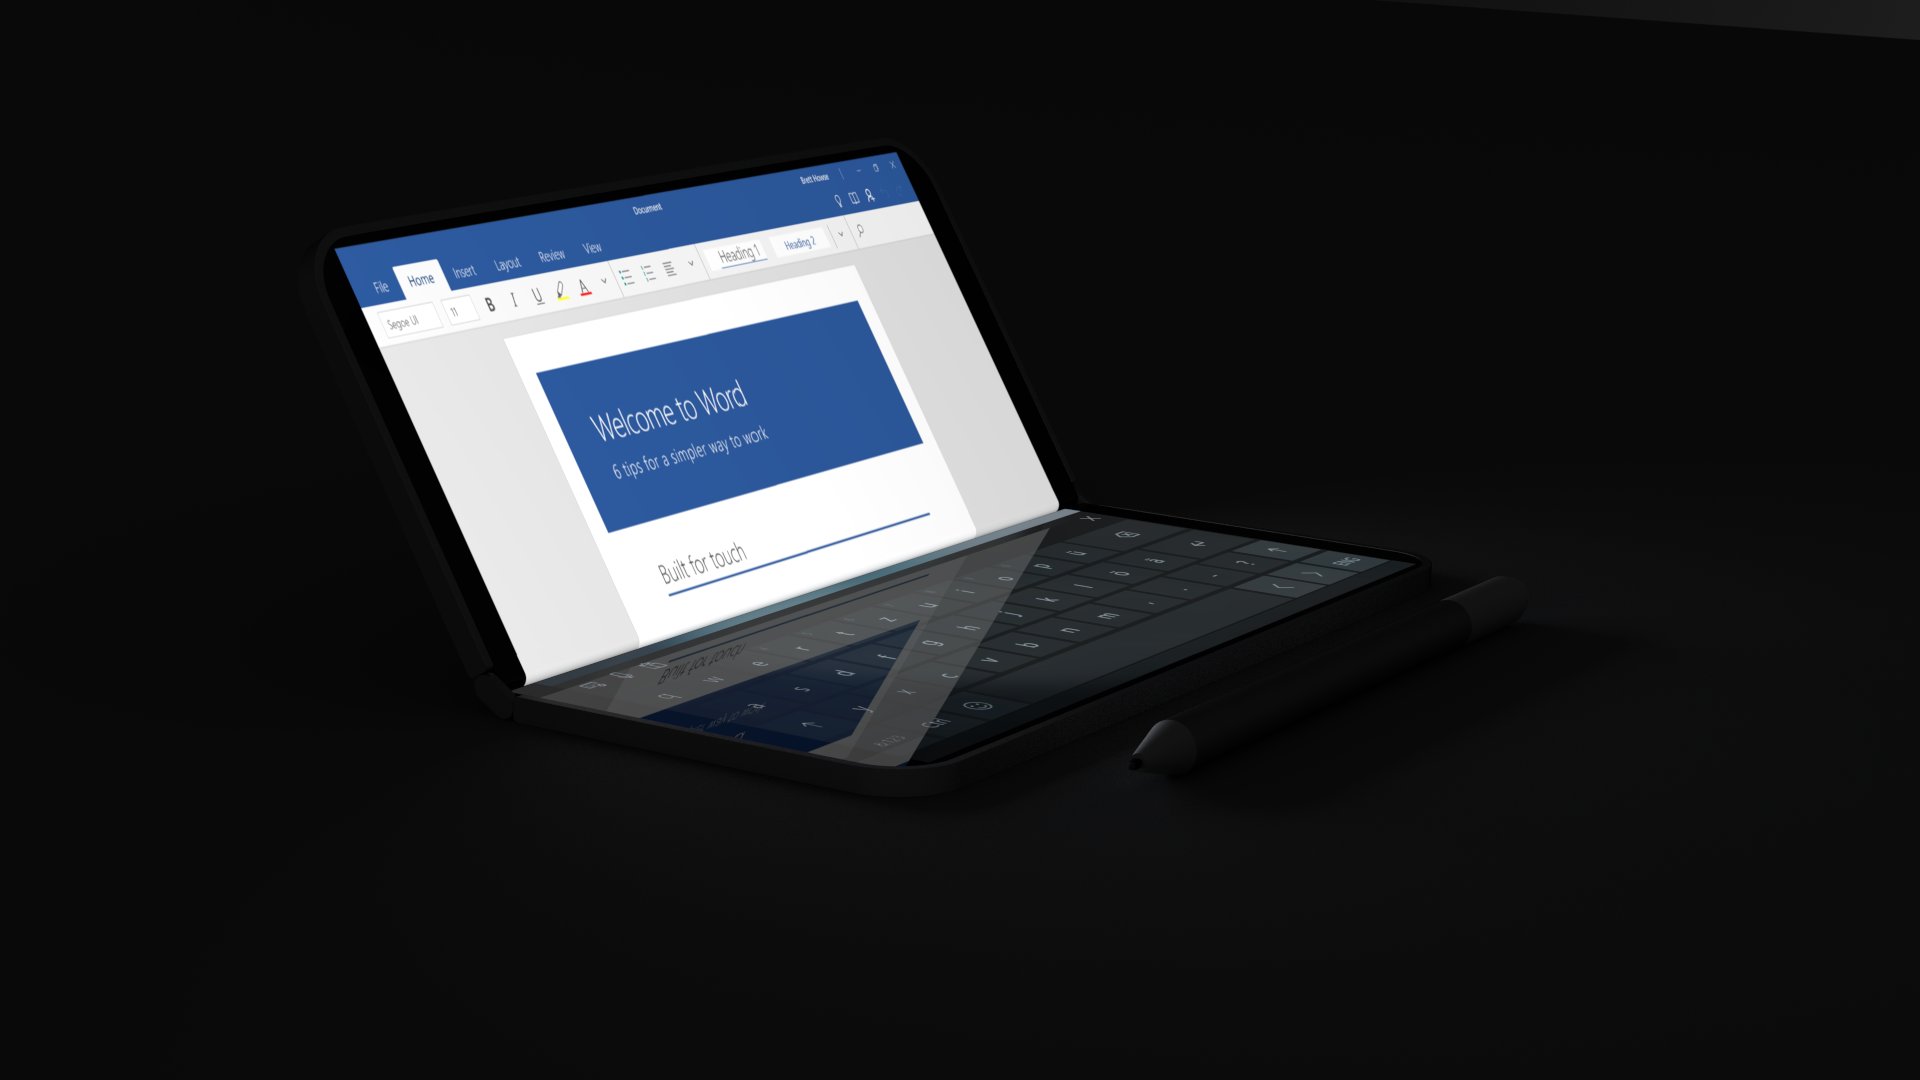 Microsoft’s mythical Surface Phone gains folding screen, pop-open glance mode